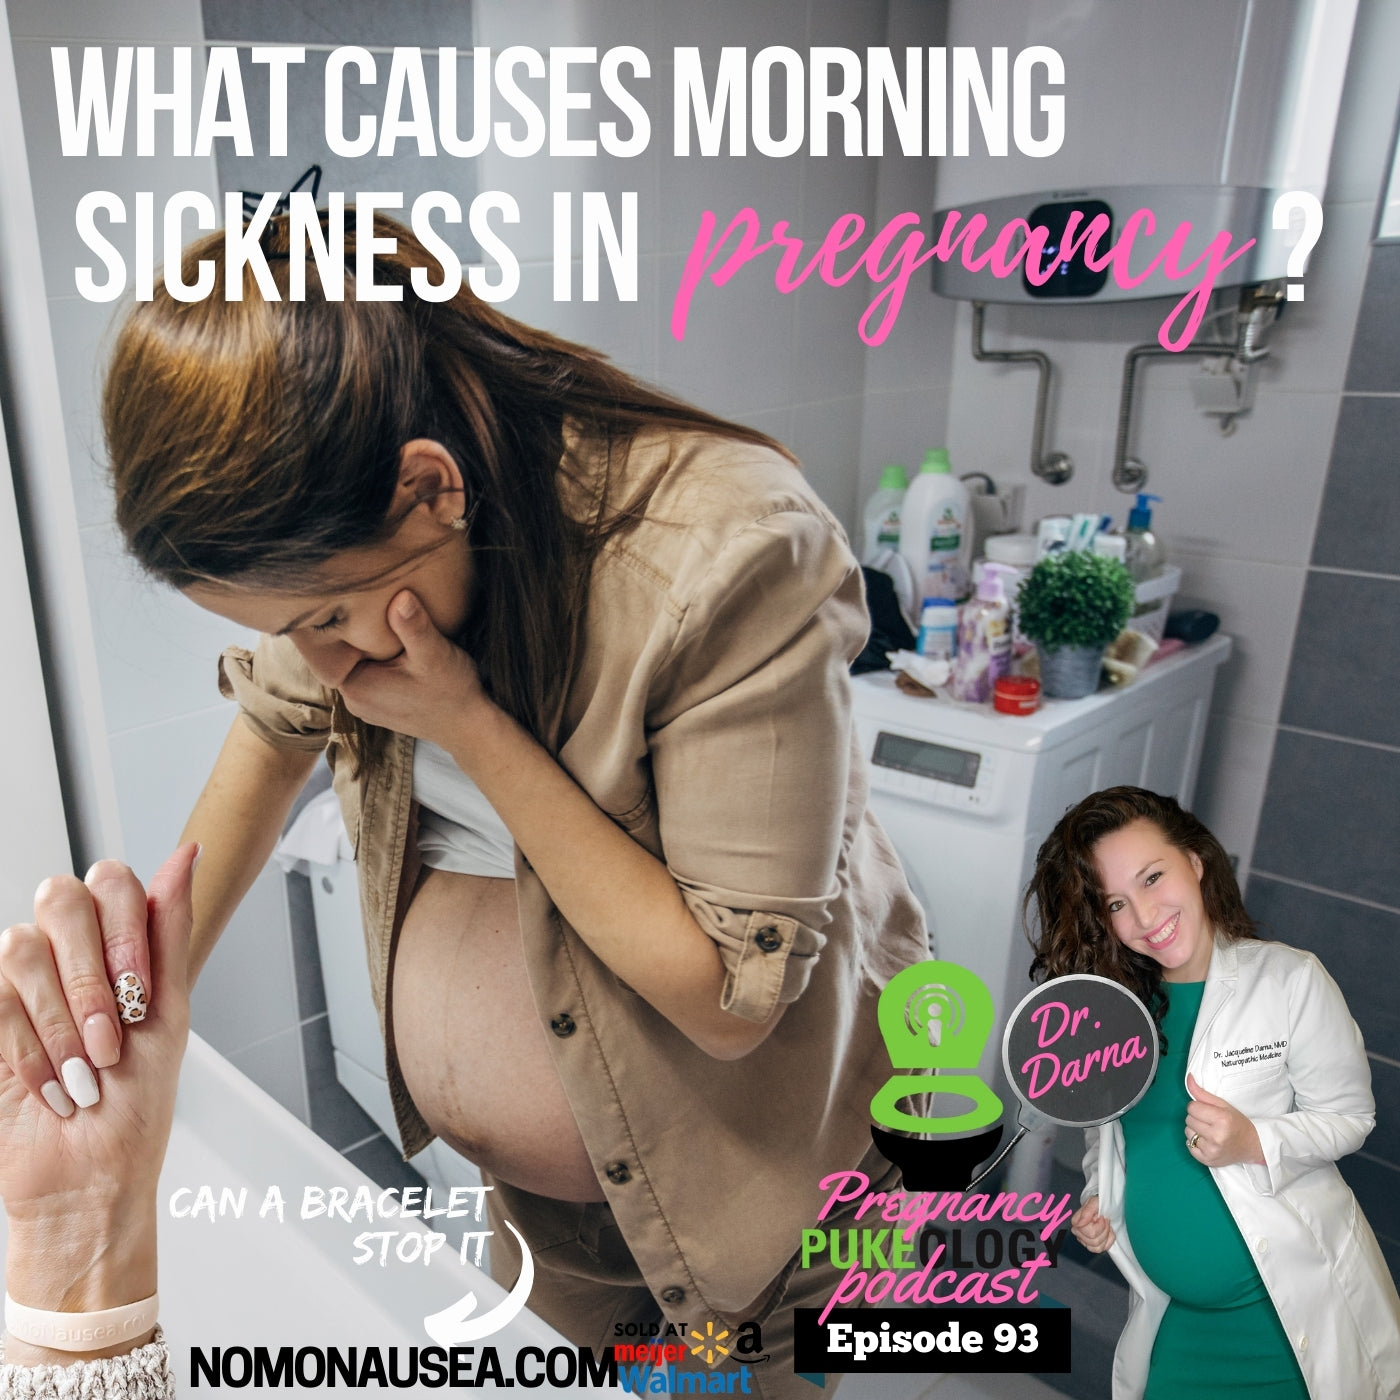 Can a Bracelet Stop Morning Sickness & What Causes Pregnancy Nausea?